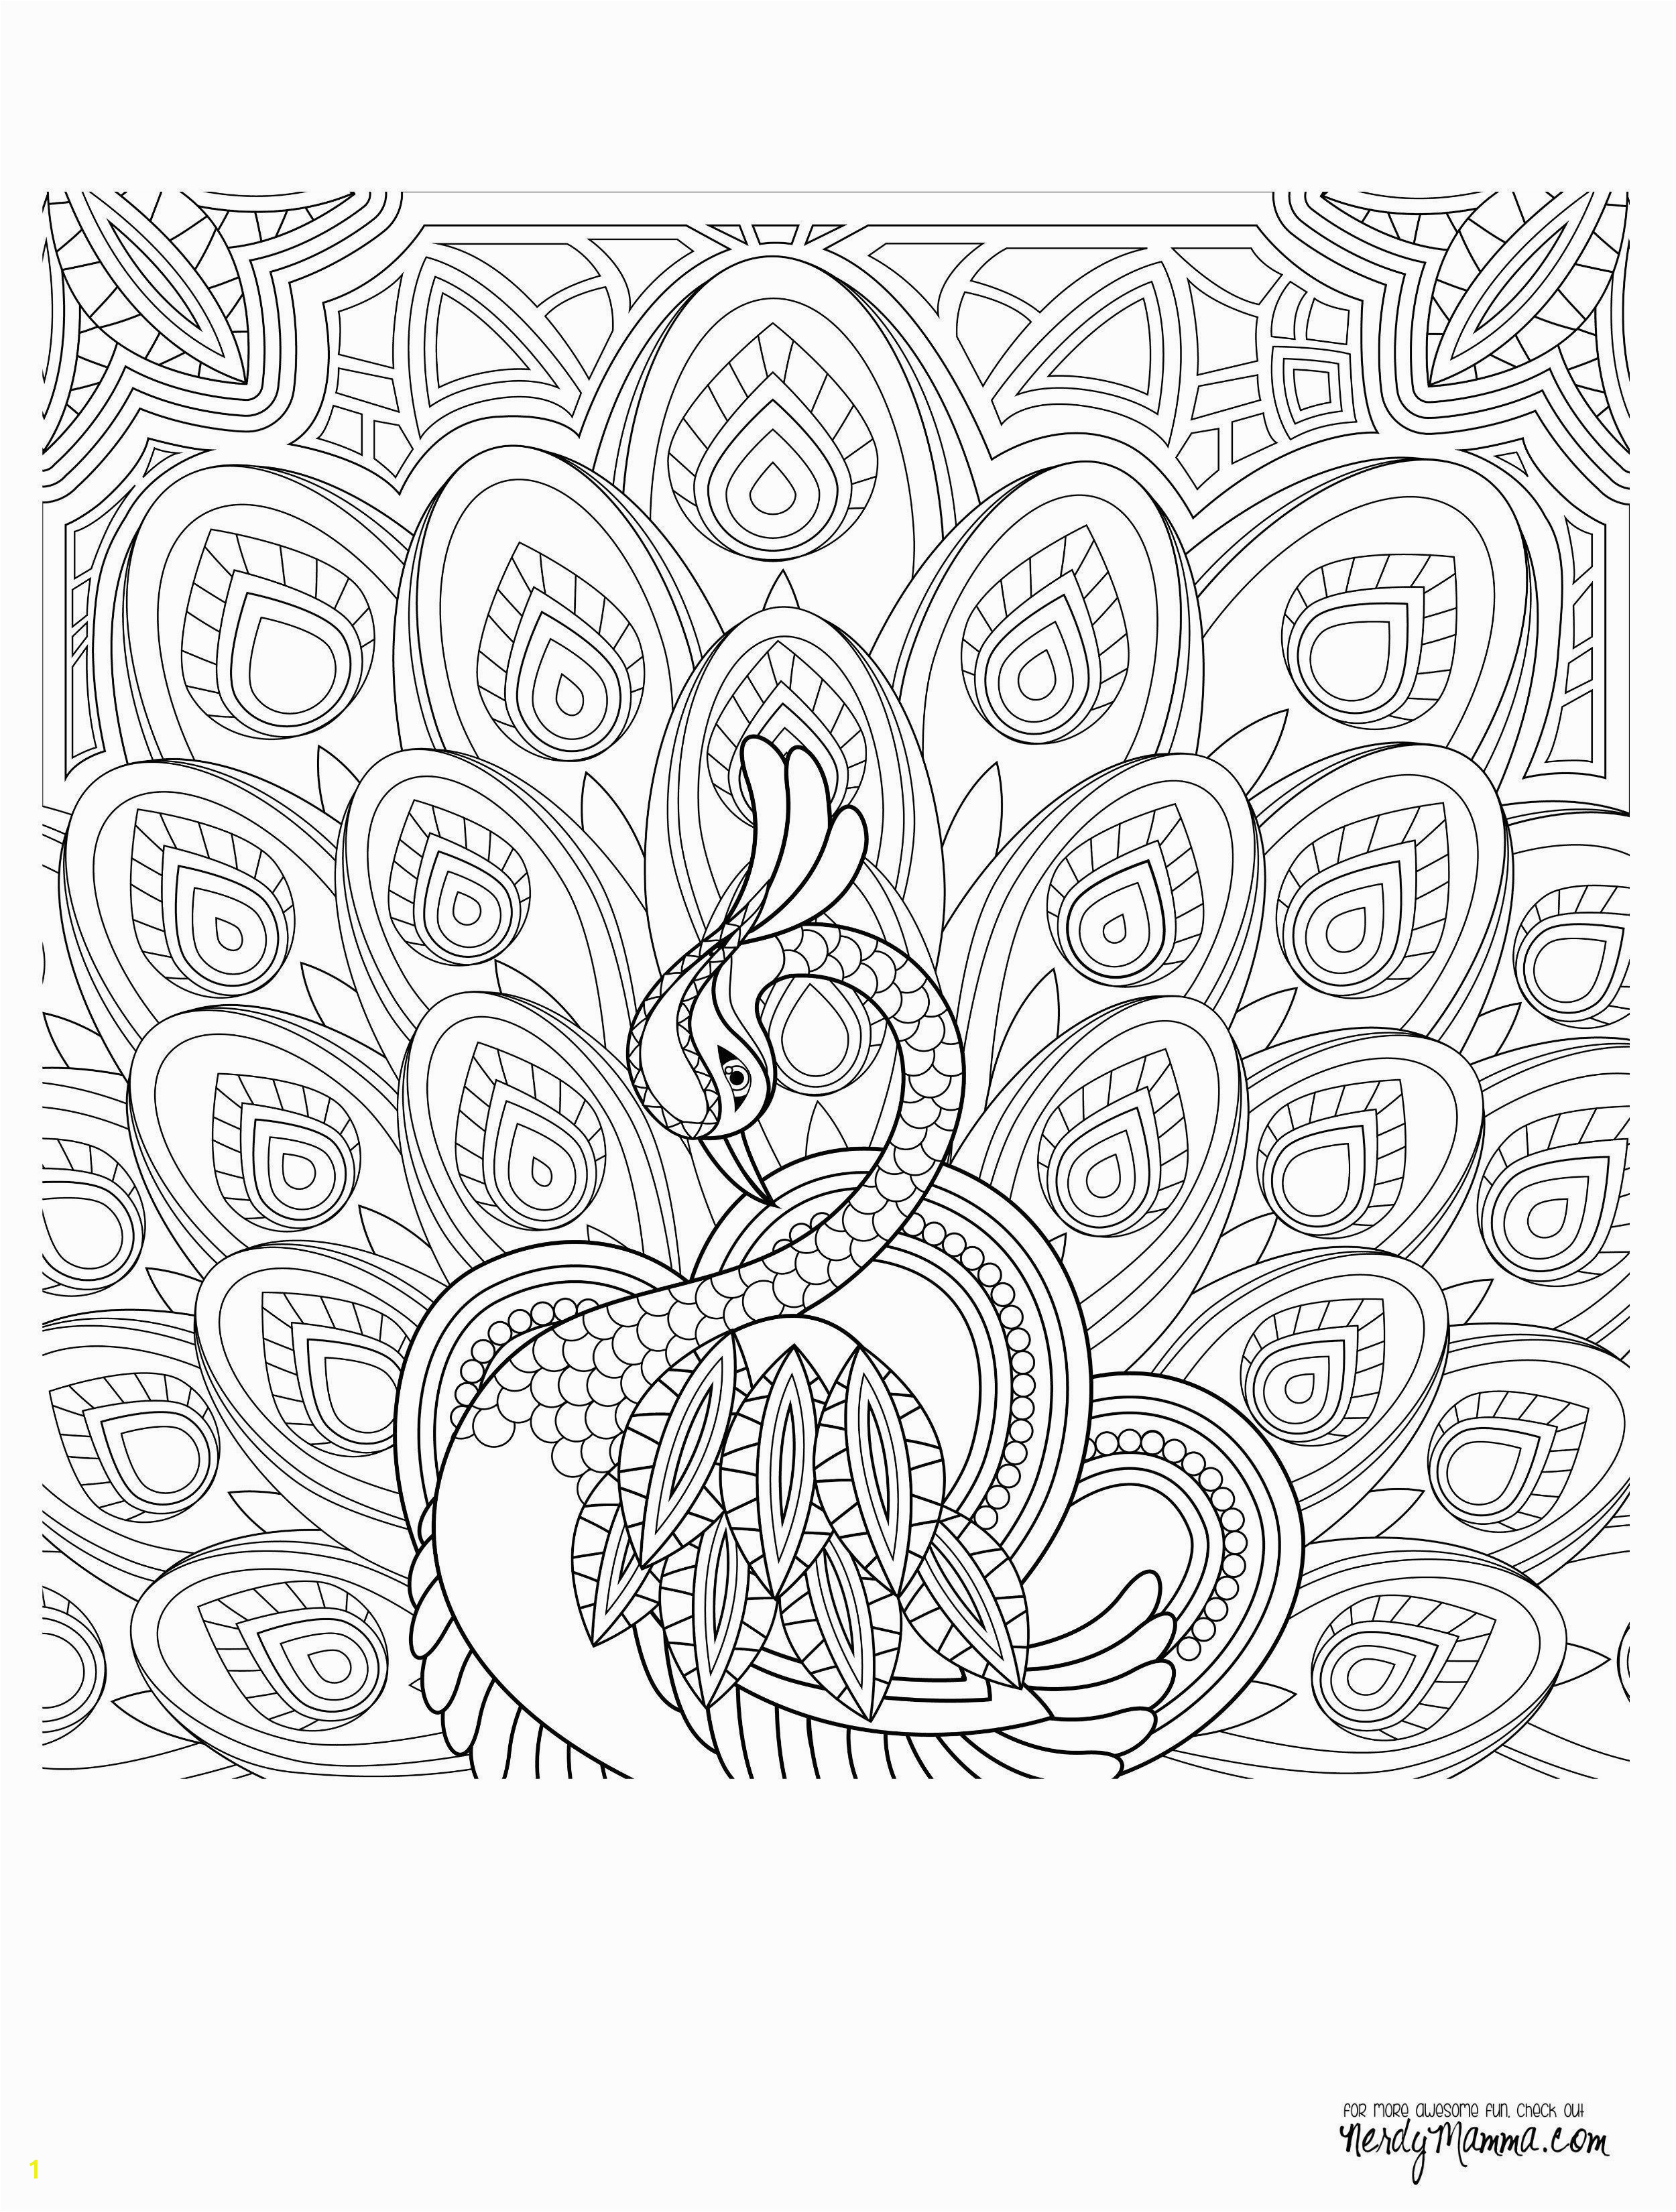 Www.coloring Pages Wunderbar Mal Coloring Pages Fresh Crayola Pages 0d